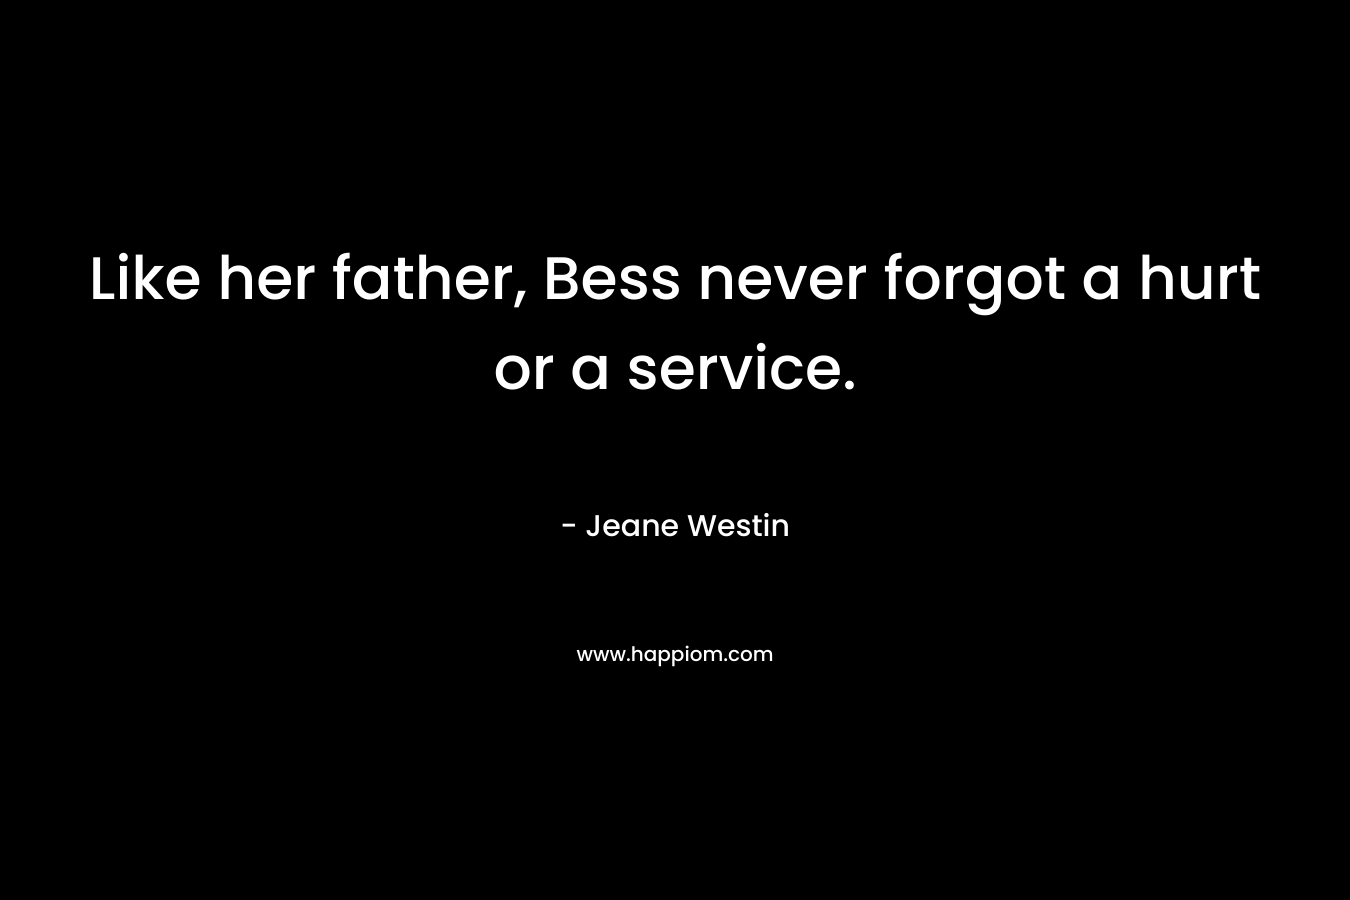 Like her father, Bess never forgot a hurt or a service.